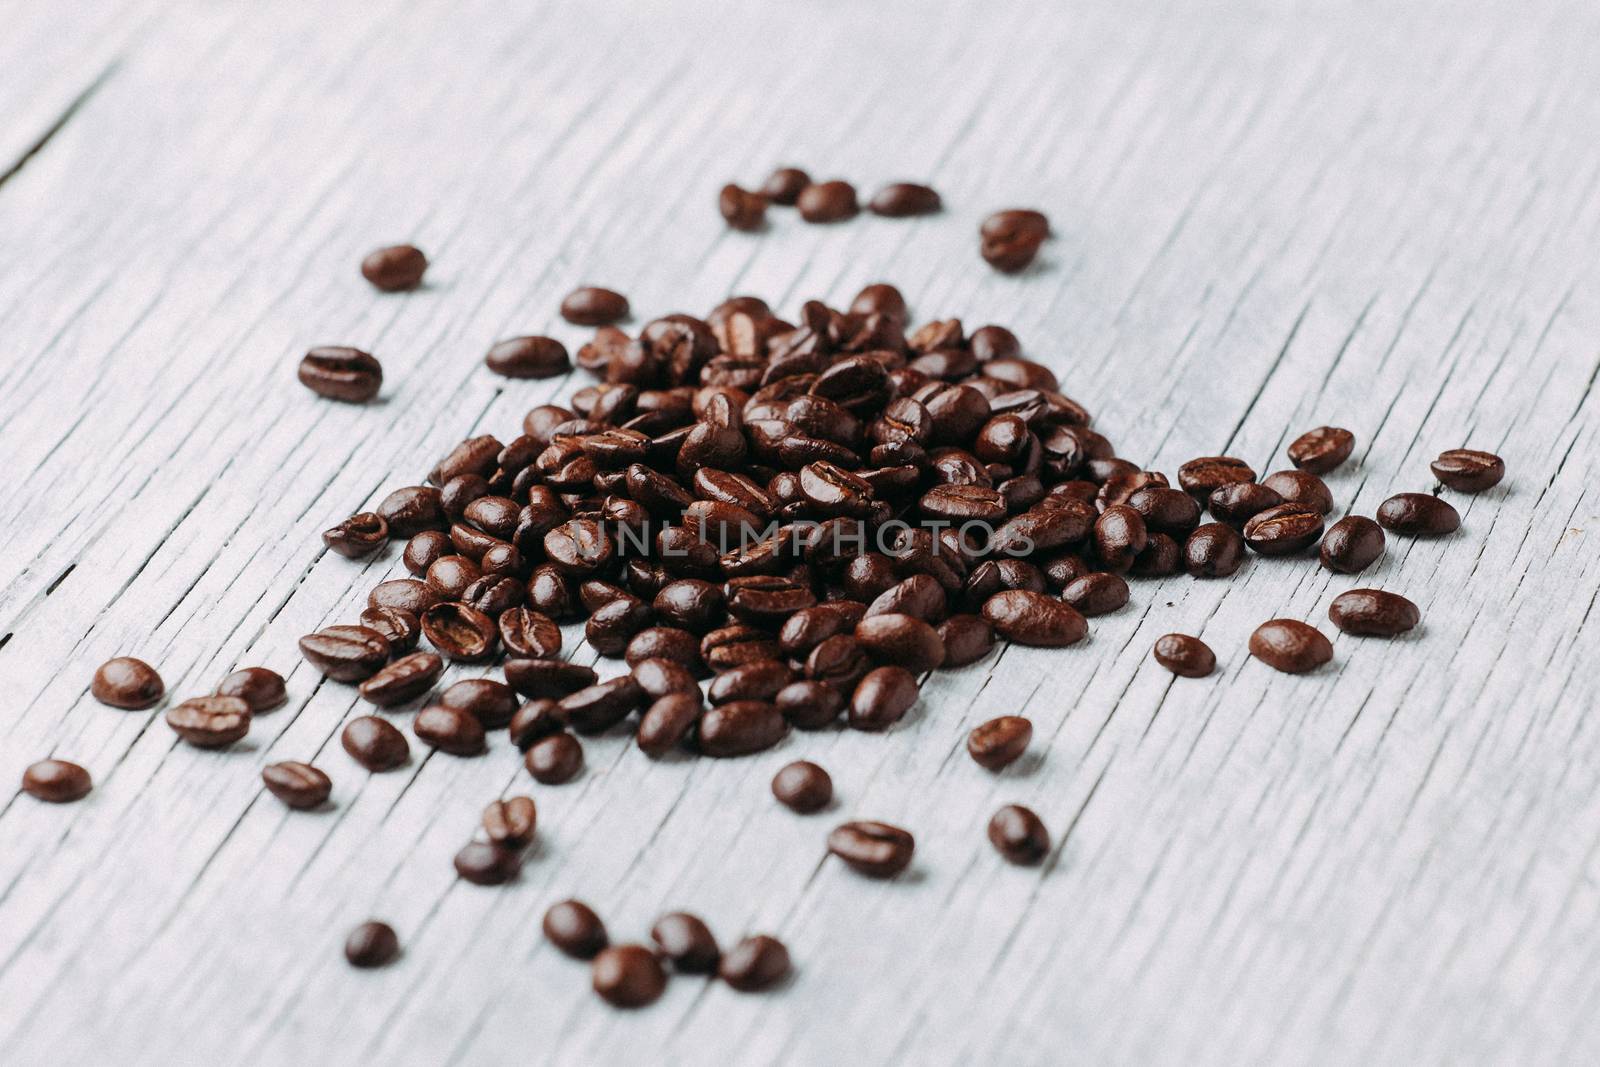 A scattering of coffee beans on a white wooden background.